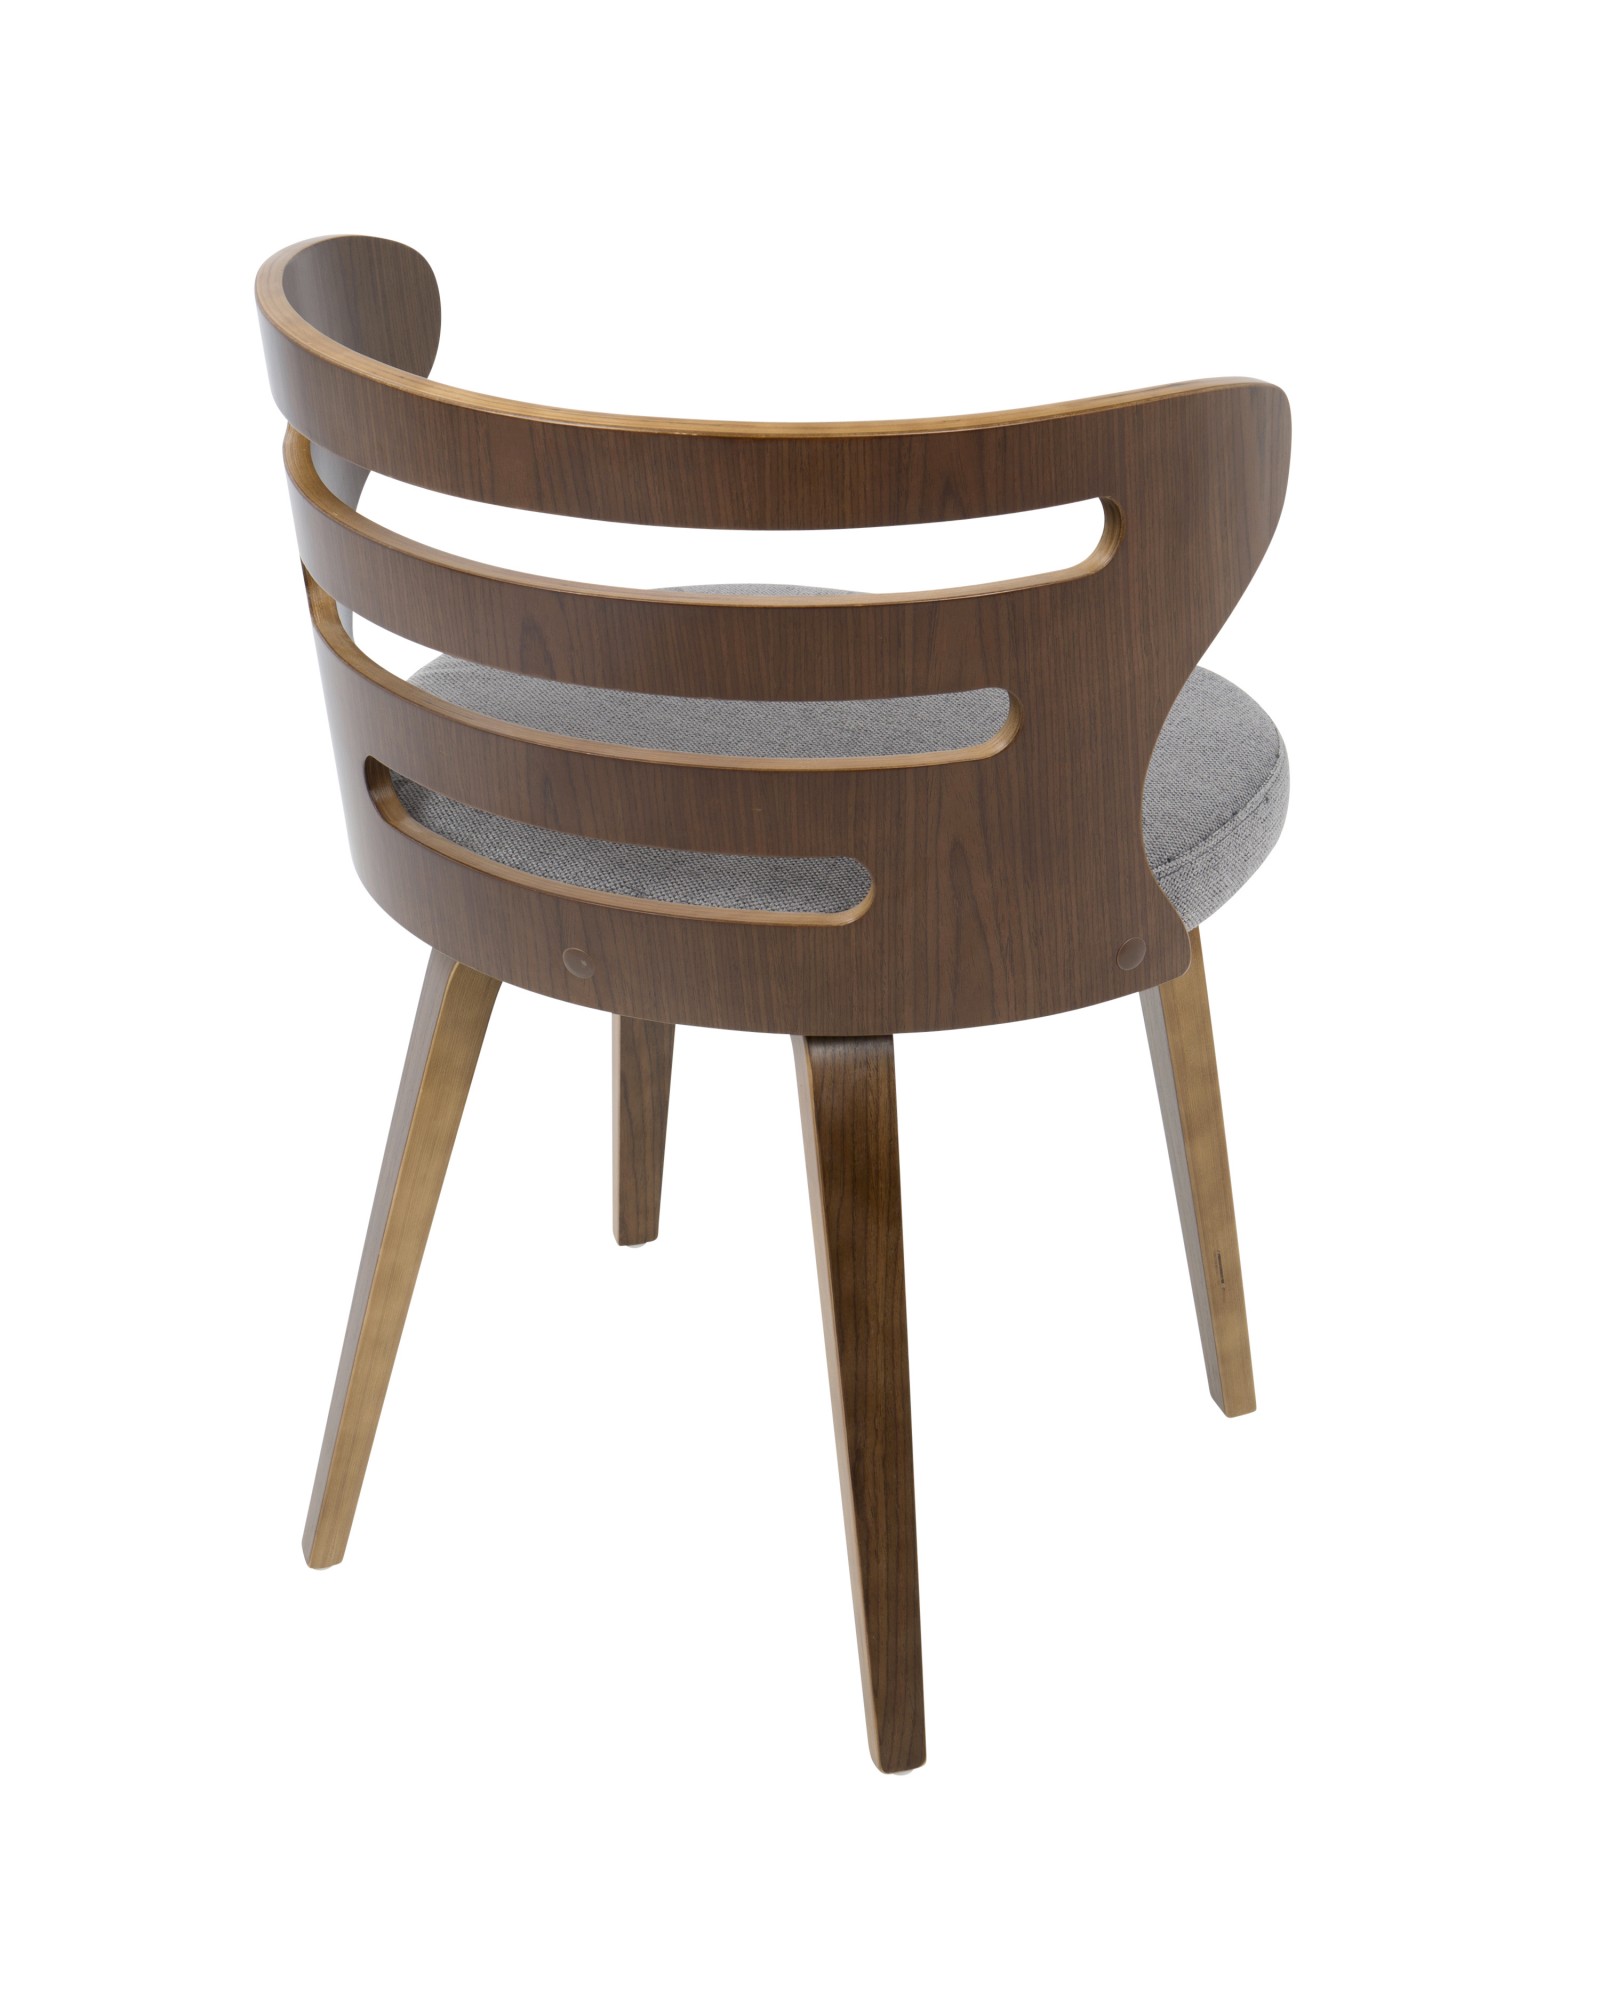 Cosi Mid-Century Modern Dining/Accent Chair in Walnut and Grey Fabric